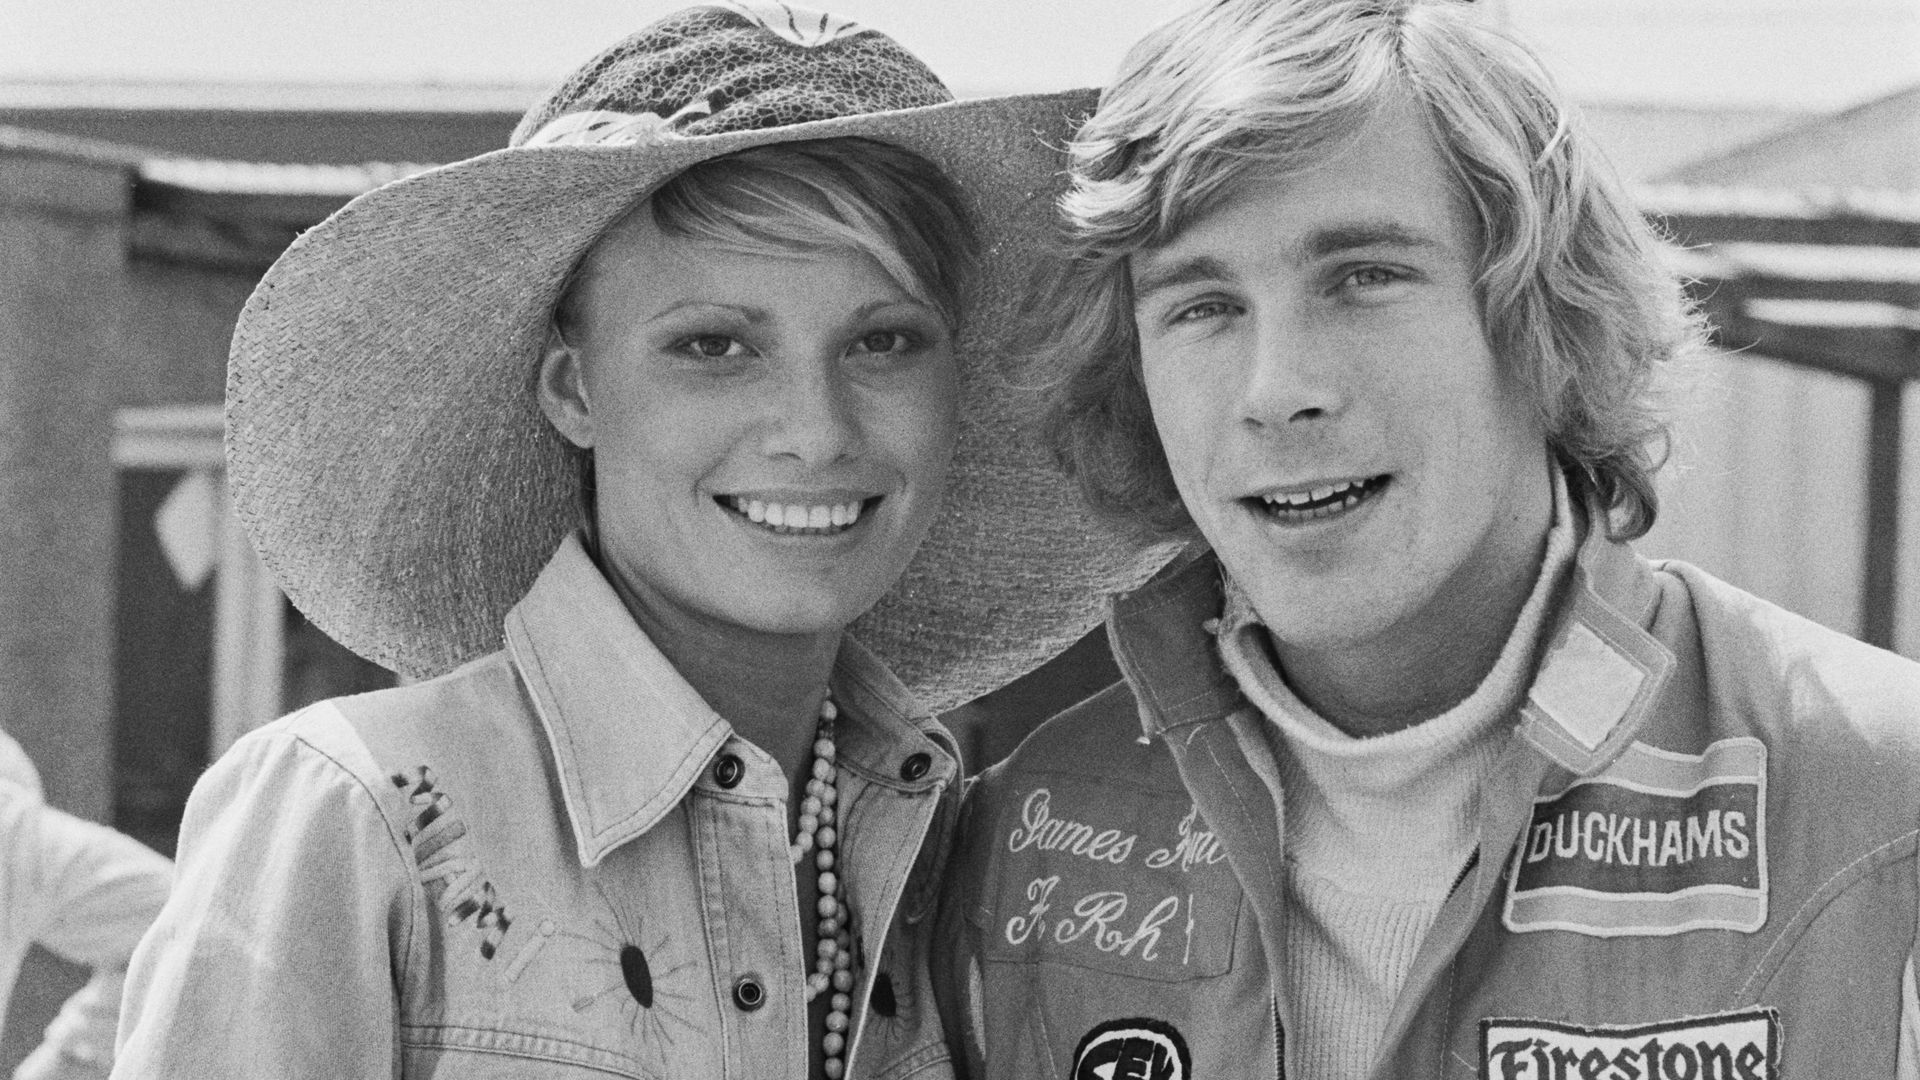 British racing driver James Hunt (1947 - 1993) with his fiancée, fashion model Suzy Miller during the 1974 British Grand Prix at Brands Hatch, UK, 20th July 1974.